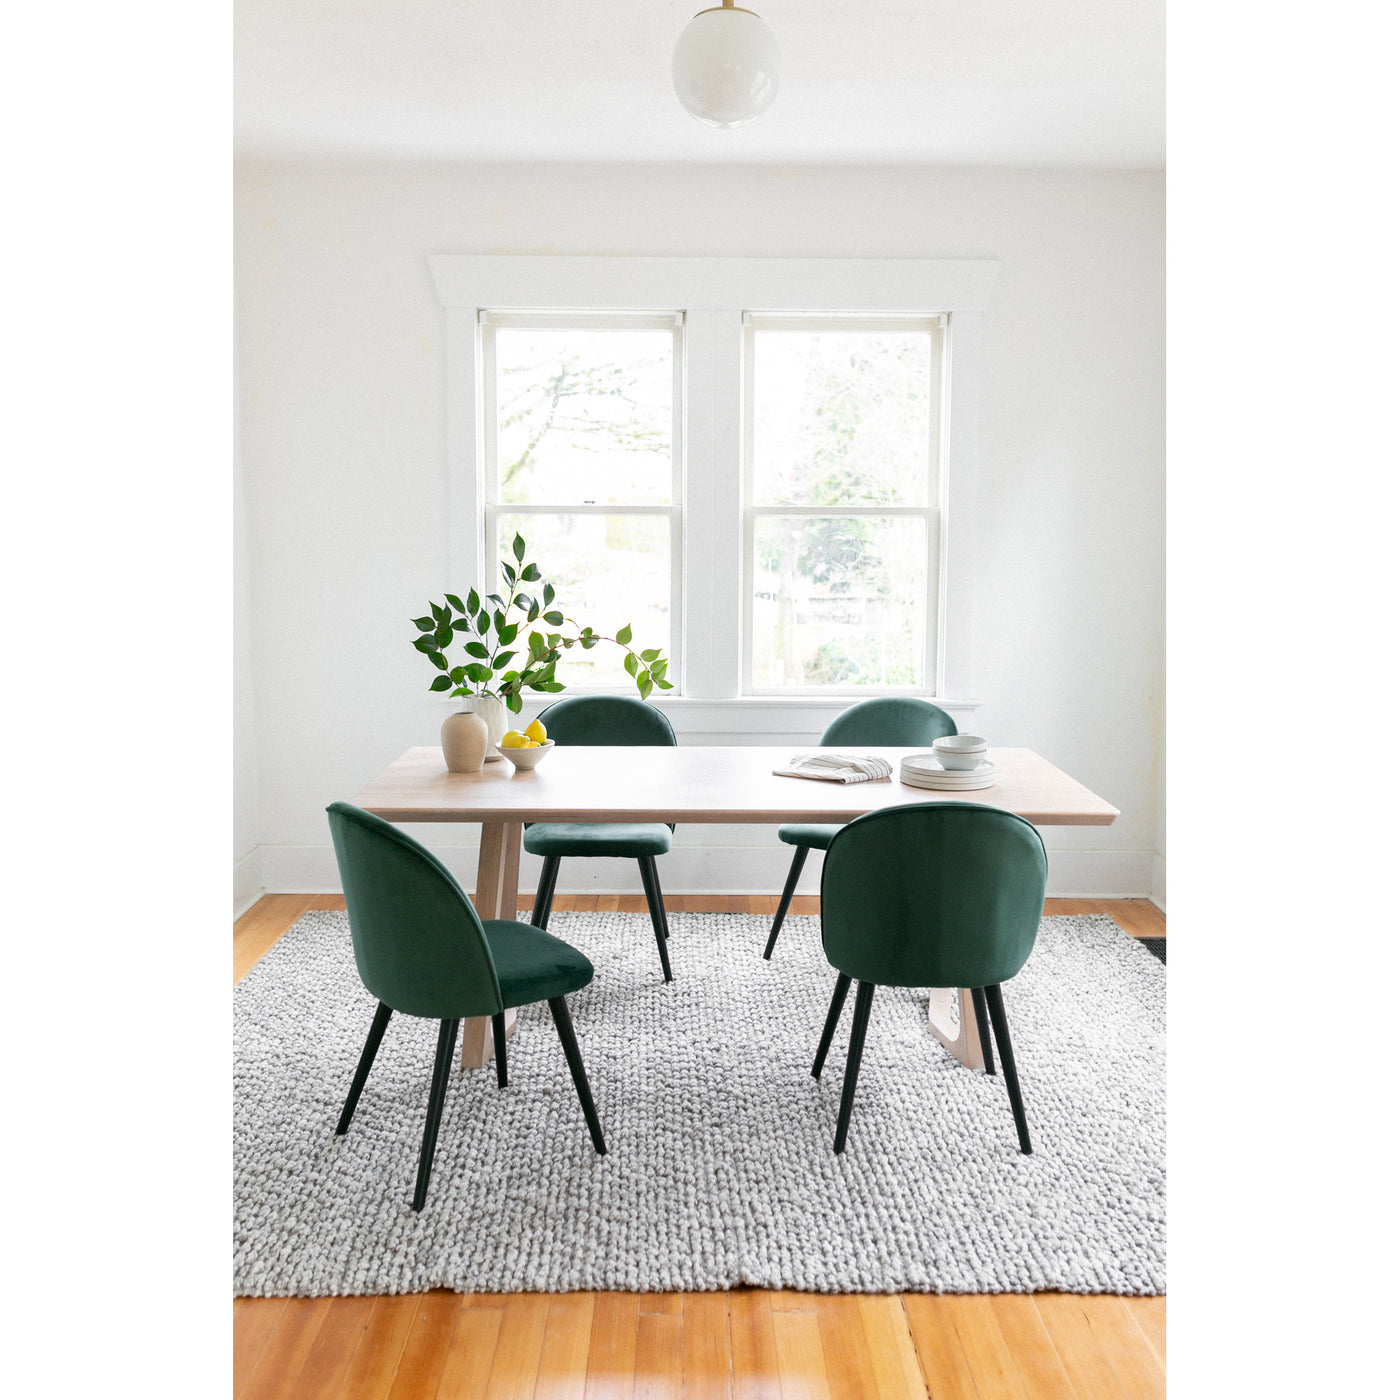 The dining table is like the heartbeat of the home. Silas is here to uplift, brighten up your dining aesthetic, and bring ...